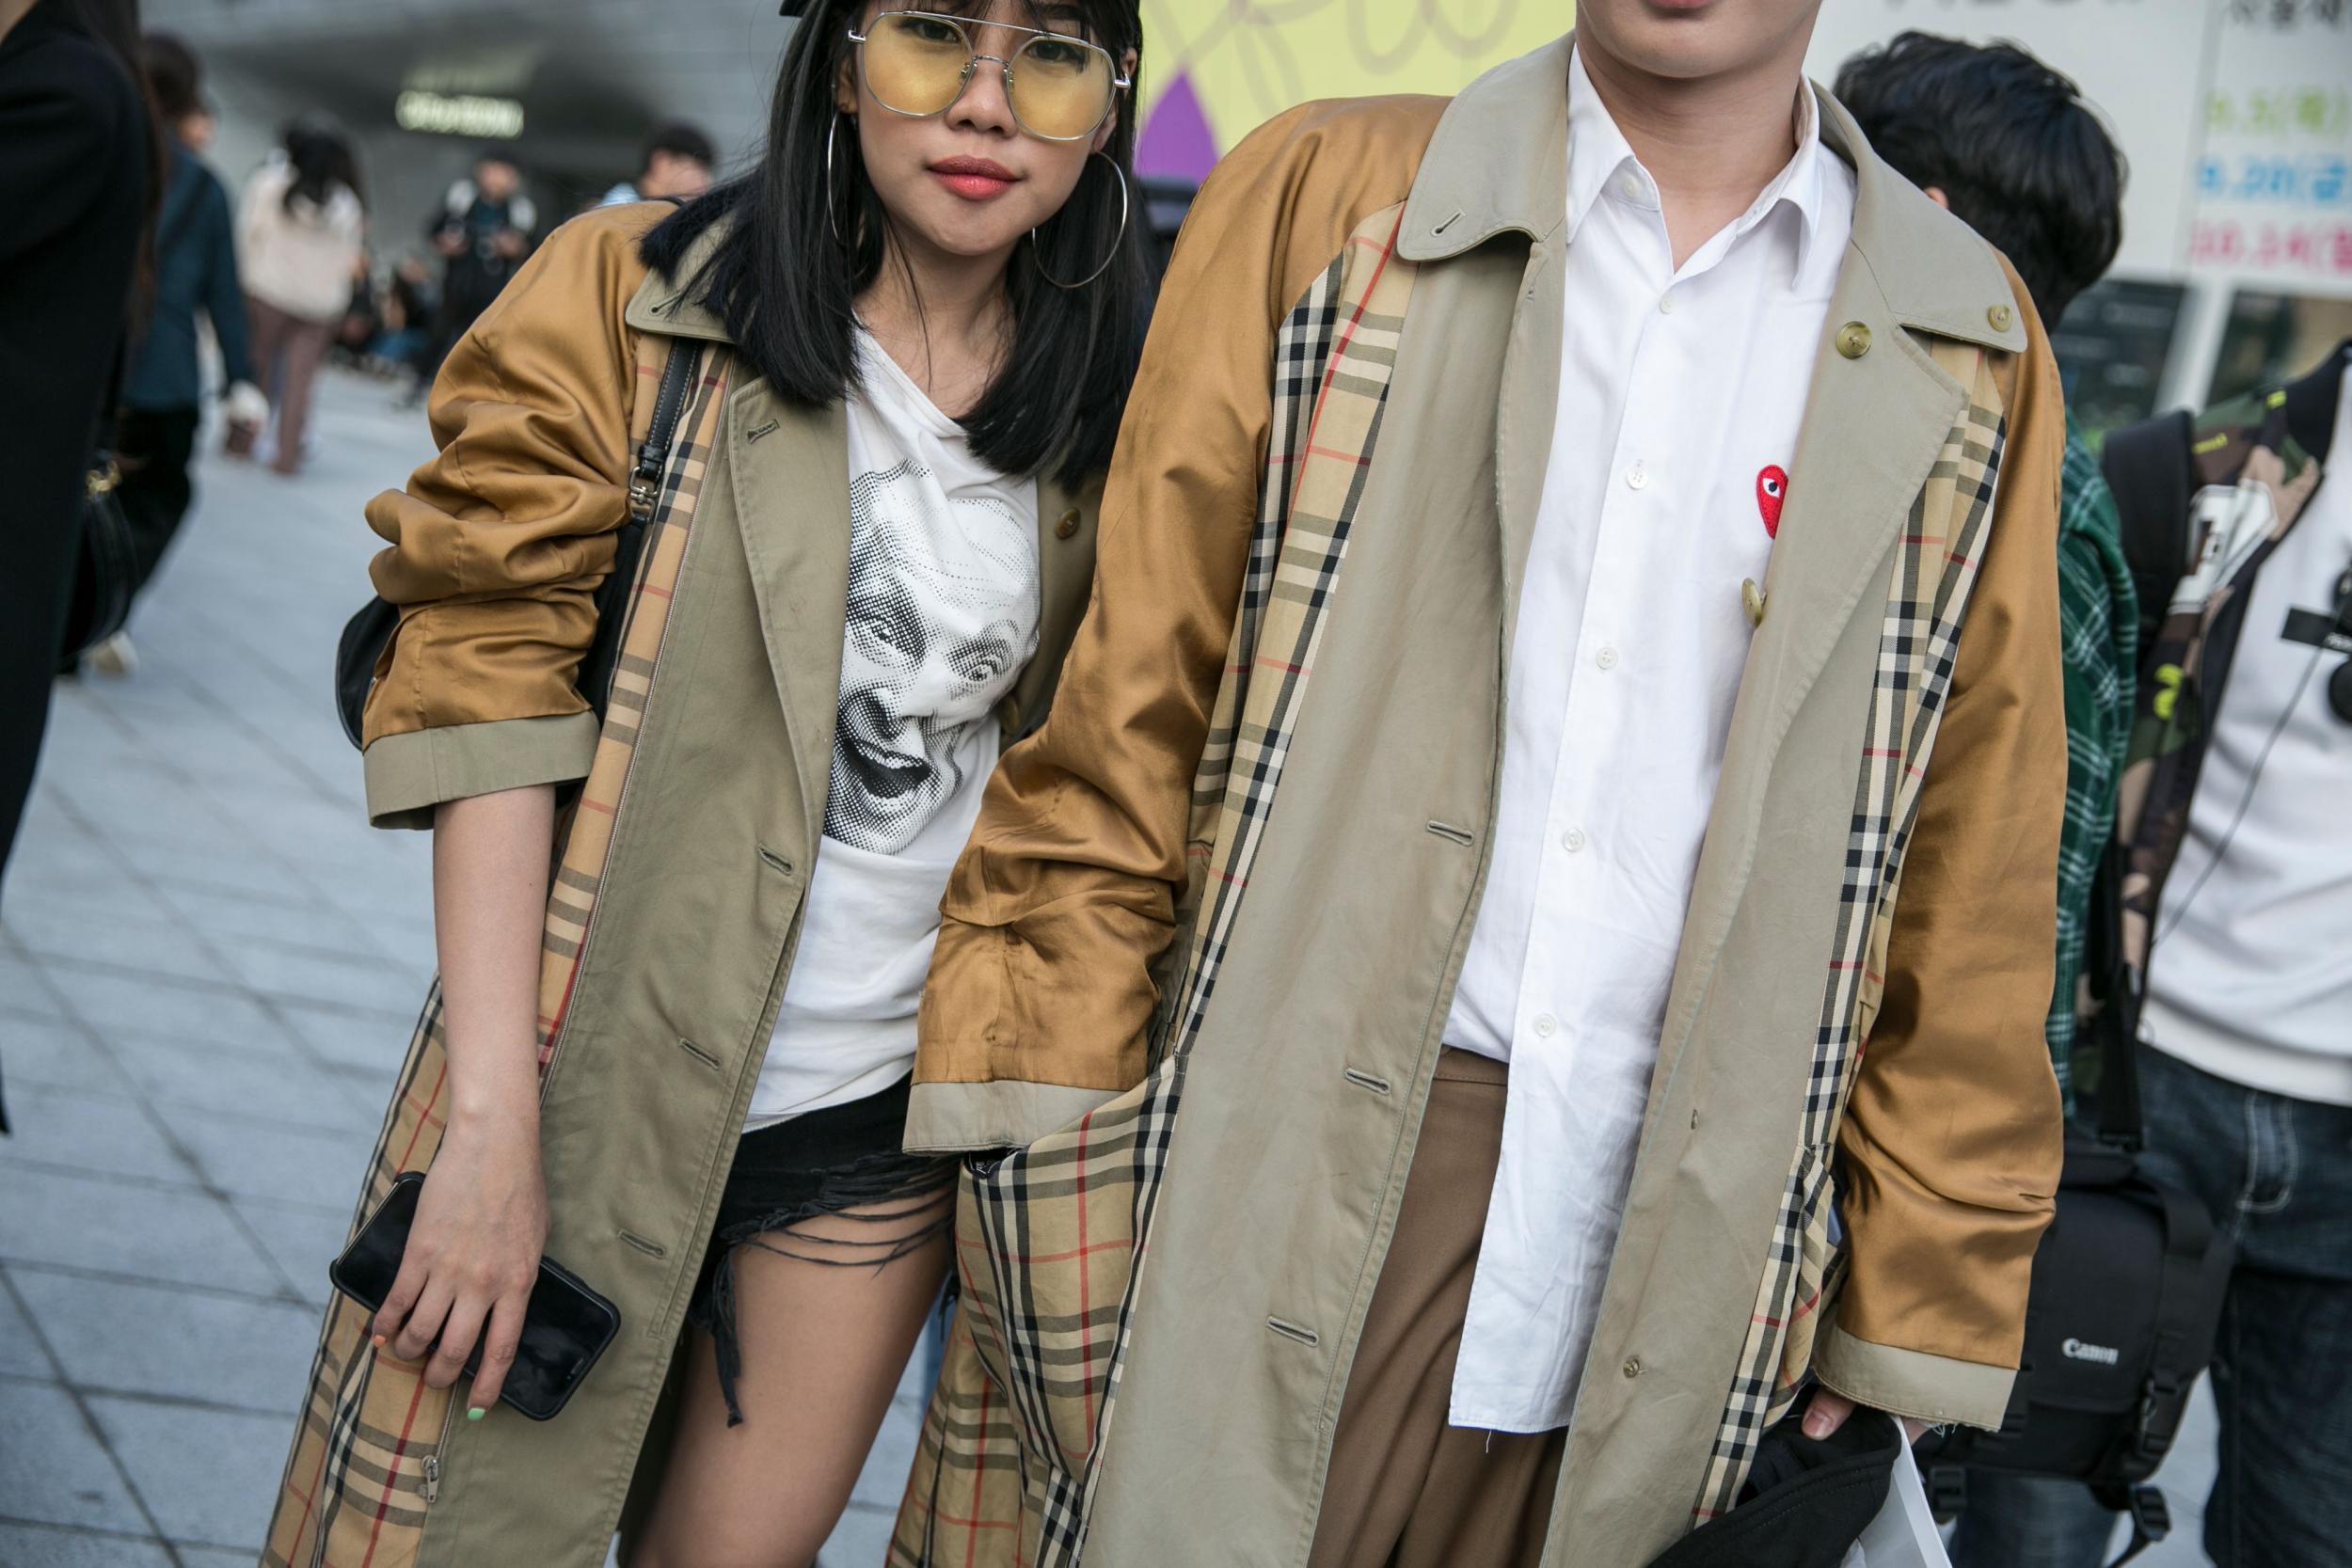 Guests wearing Burberry trench coats at Seoul Fashion Week in 2019